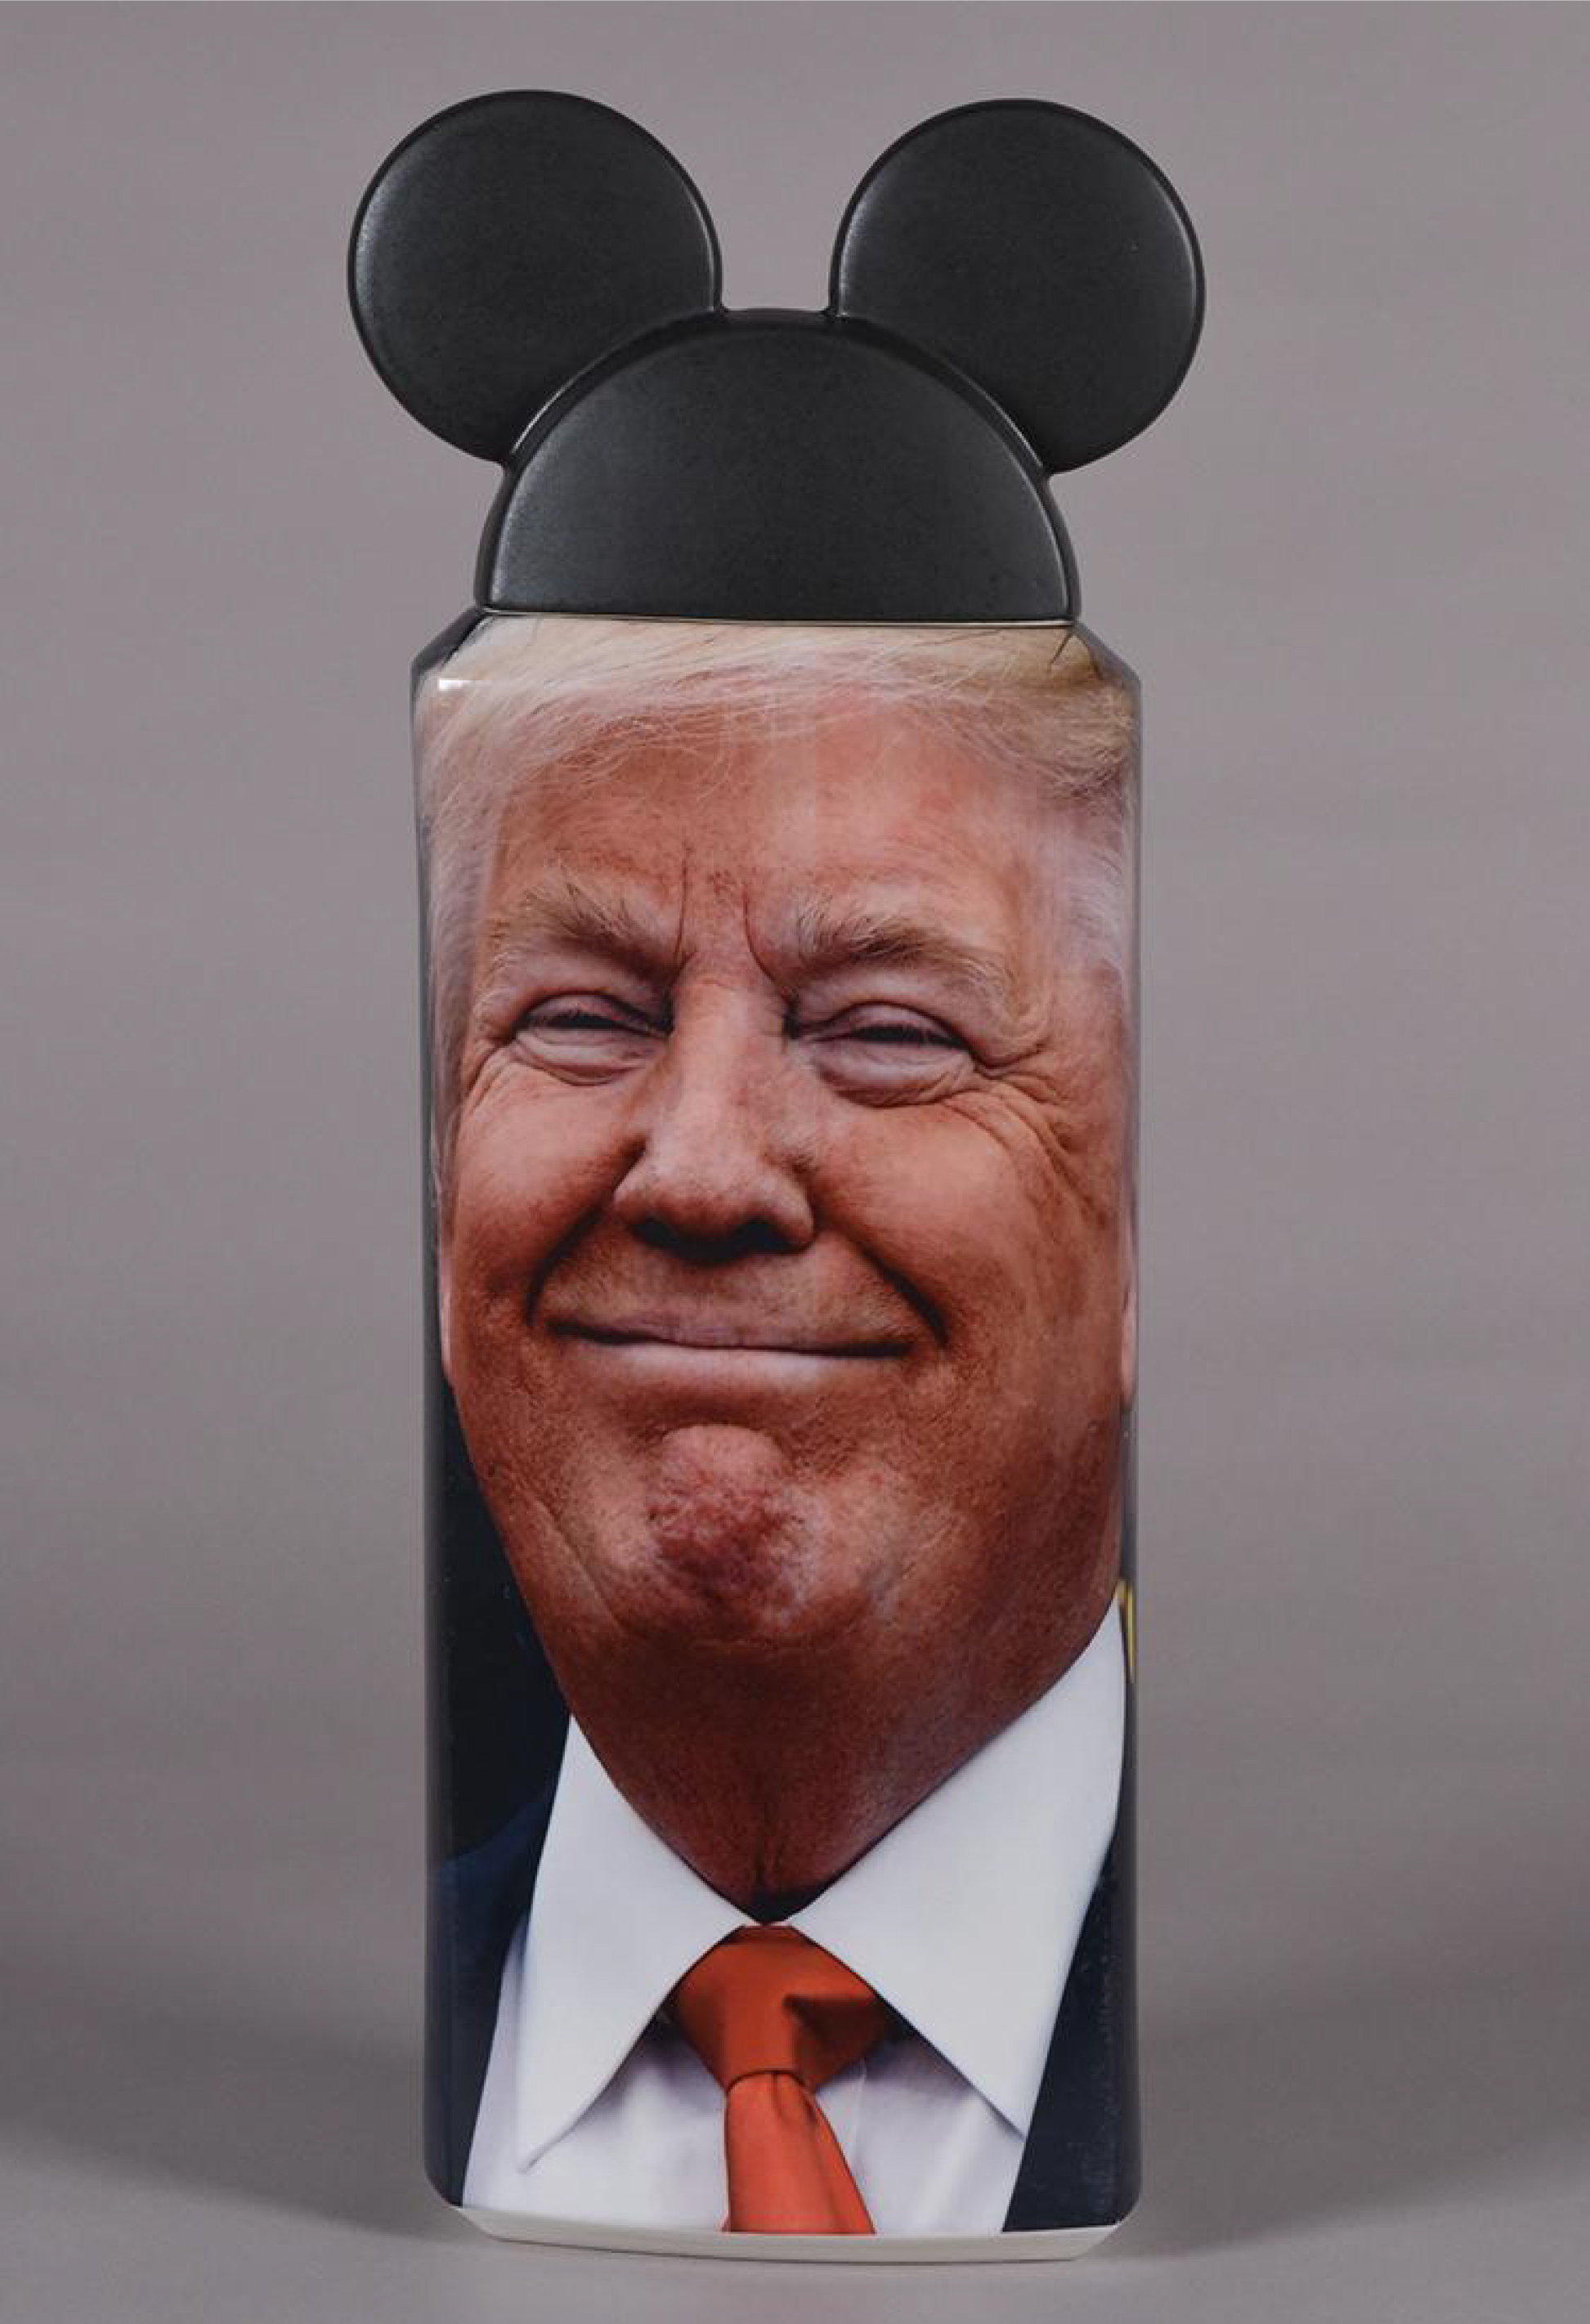 Lidded ceramic vessel with a photographic image of Donald Trump. The vessel's lid is made to look like Mickey Mouse ears